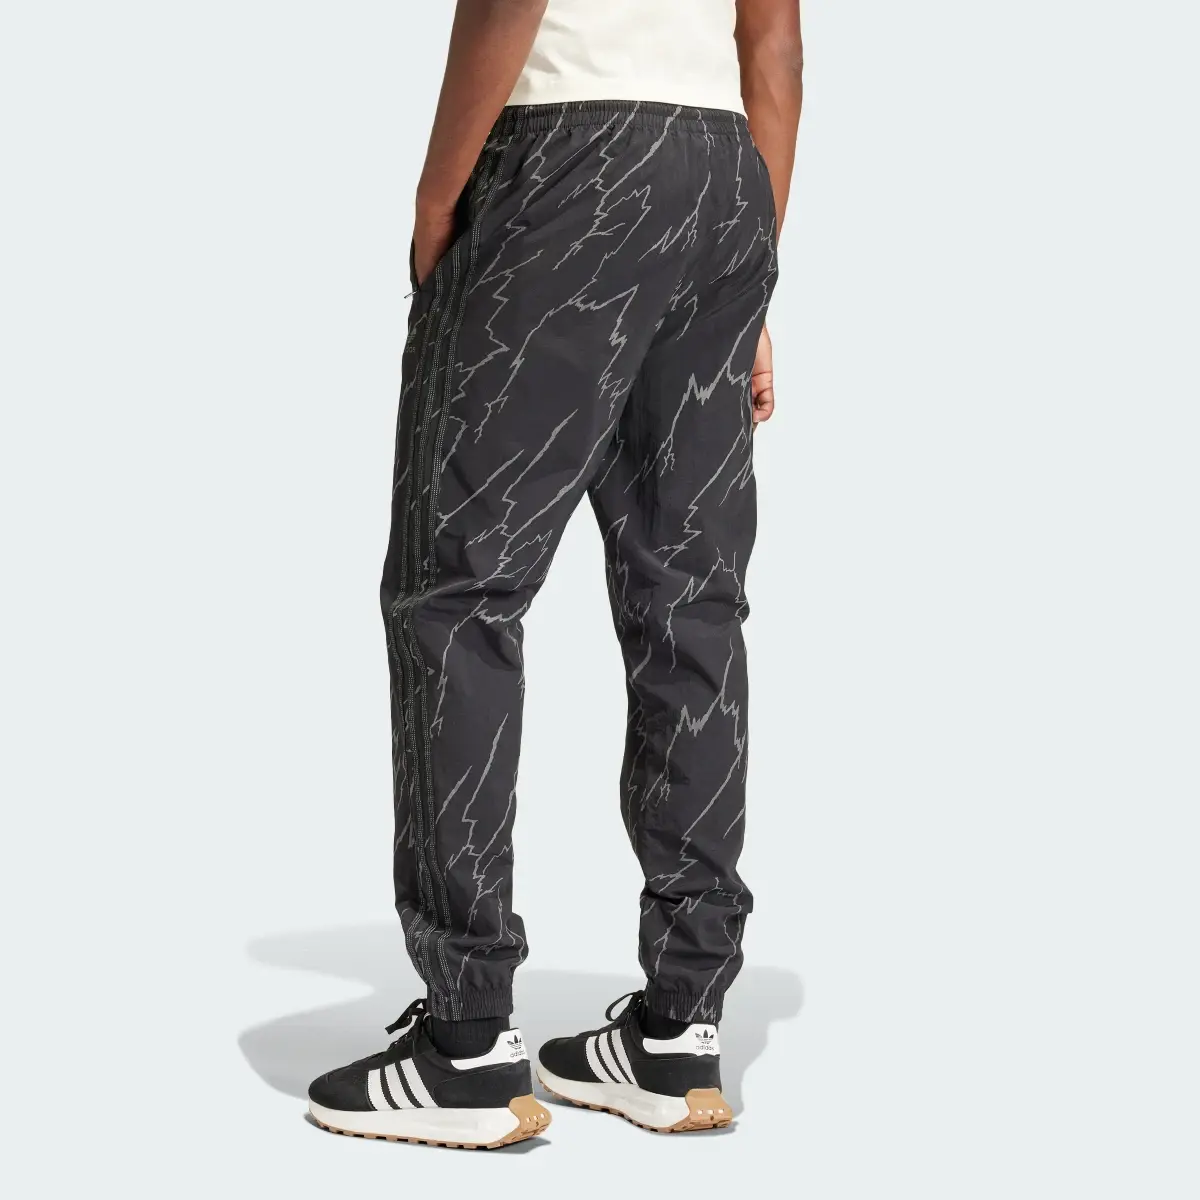 Adidas Track pants Allover Print SST. 3